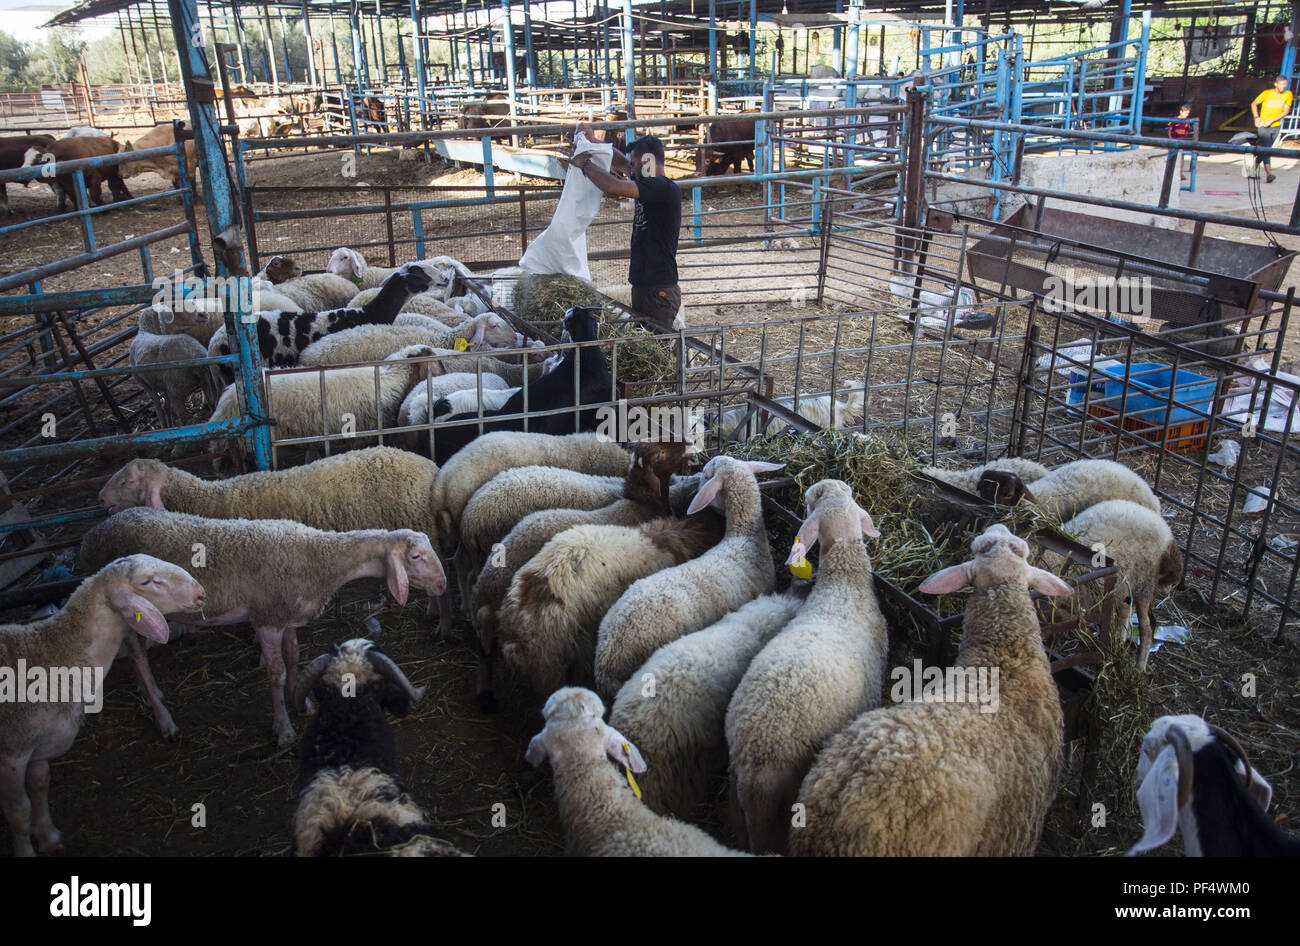 Gaza City, The Gaza Strip, Gaza. 18th Aug, 2018. A farmer seen feeding the cattles.Palestinians gather in a cattle shop to purchase cattles to be sacrificed. before Eid al-Adha in the east of Jabalya refugee camp. Eid al-Adha (Festival of Sacrifice) is celebrated throughout the Islamic world as the commemoration of Abraham's will to sacrifice his son for God, cows, camels, goats and sheep are traditionally slaughtered on the Holy Day. Credit: Mahmoud Issa/SOPA Images/ZUMA Wire/Alamy Live News Stock Photo